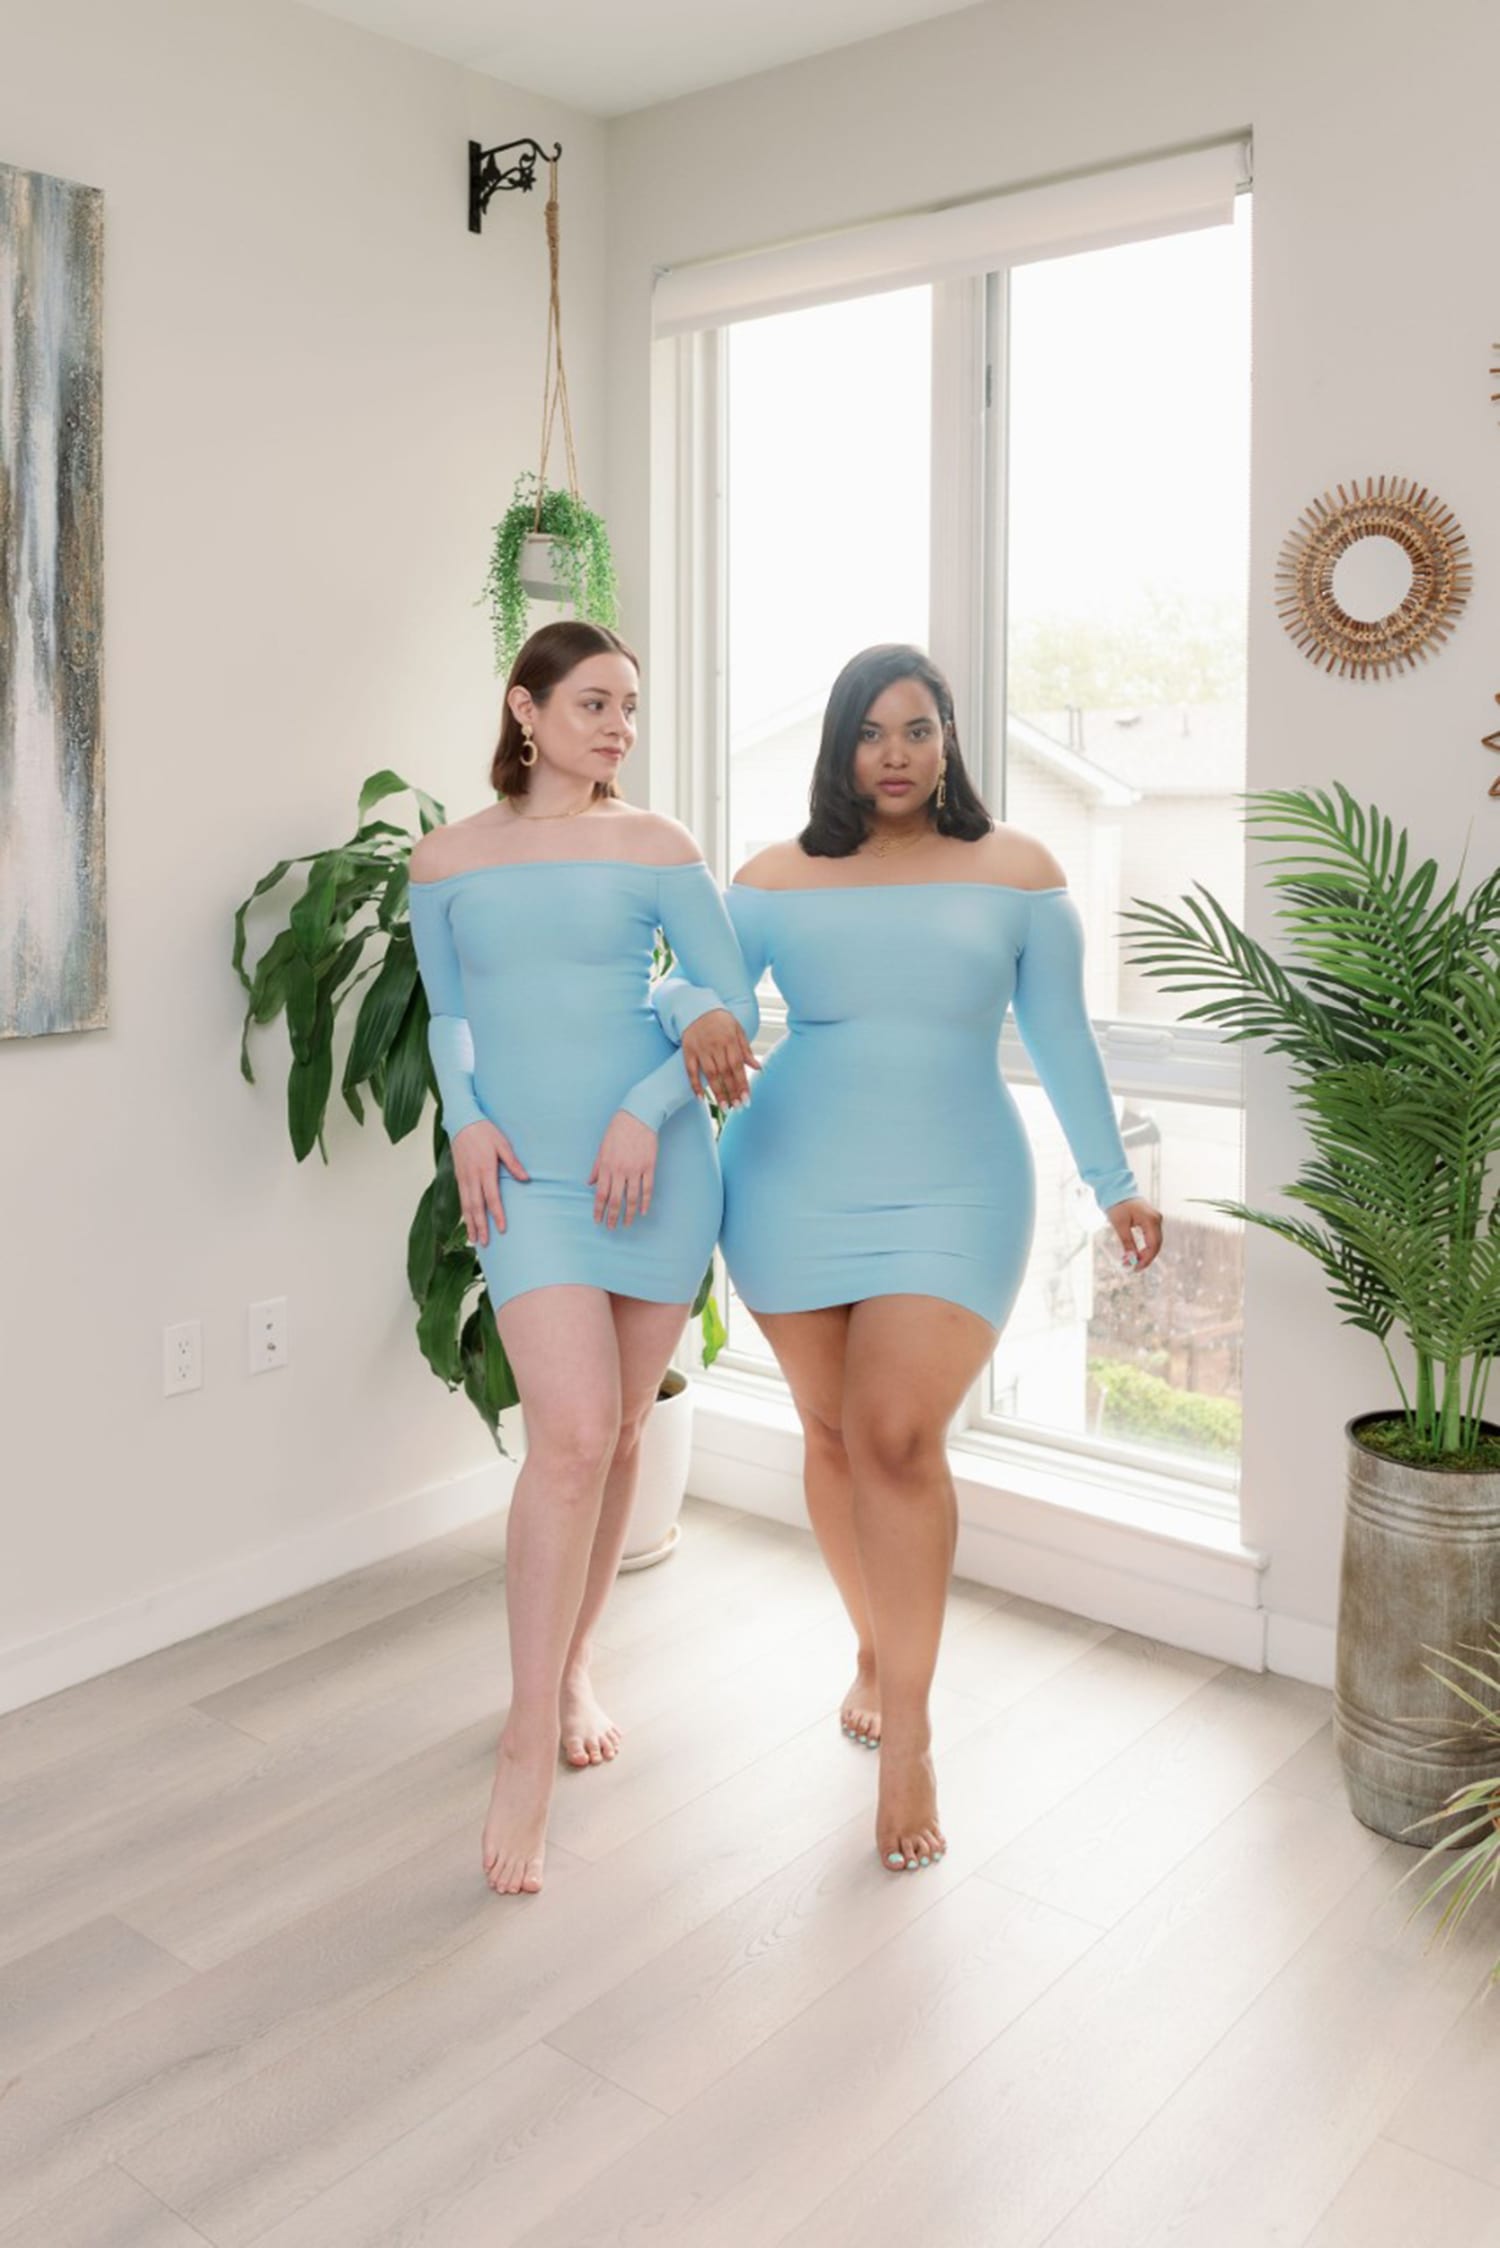 I'm a size 16 and my friend is a 2 - we tried the same shapewear